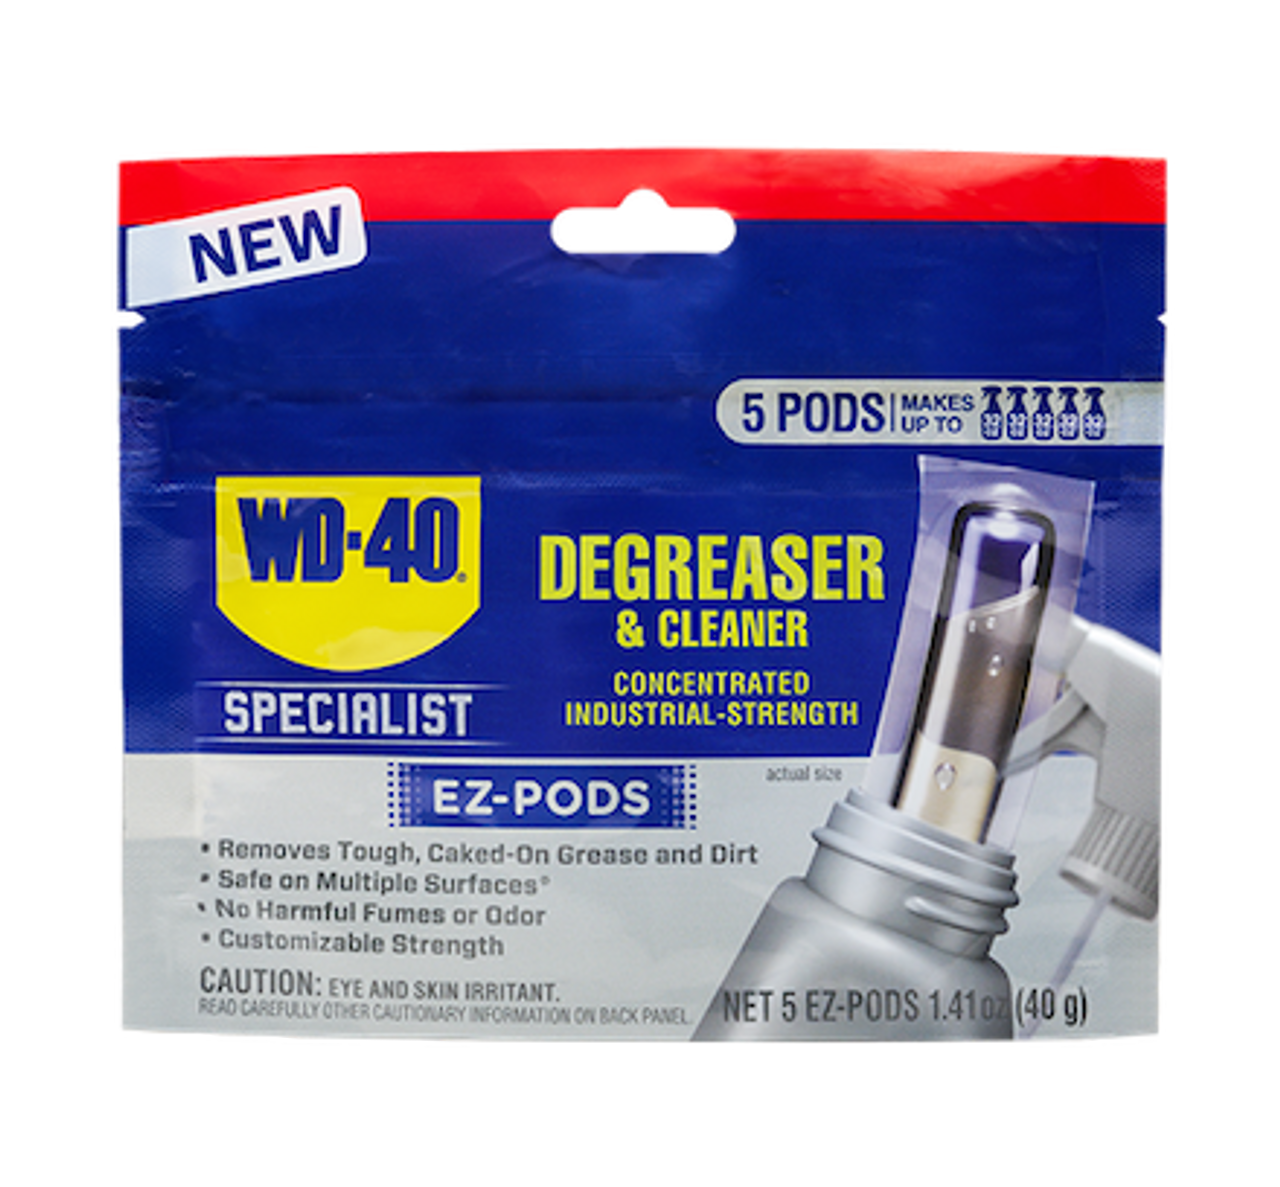 2 Pack Purple Power Concentrated Industrial Cleaner/Degreaser, 32